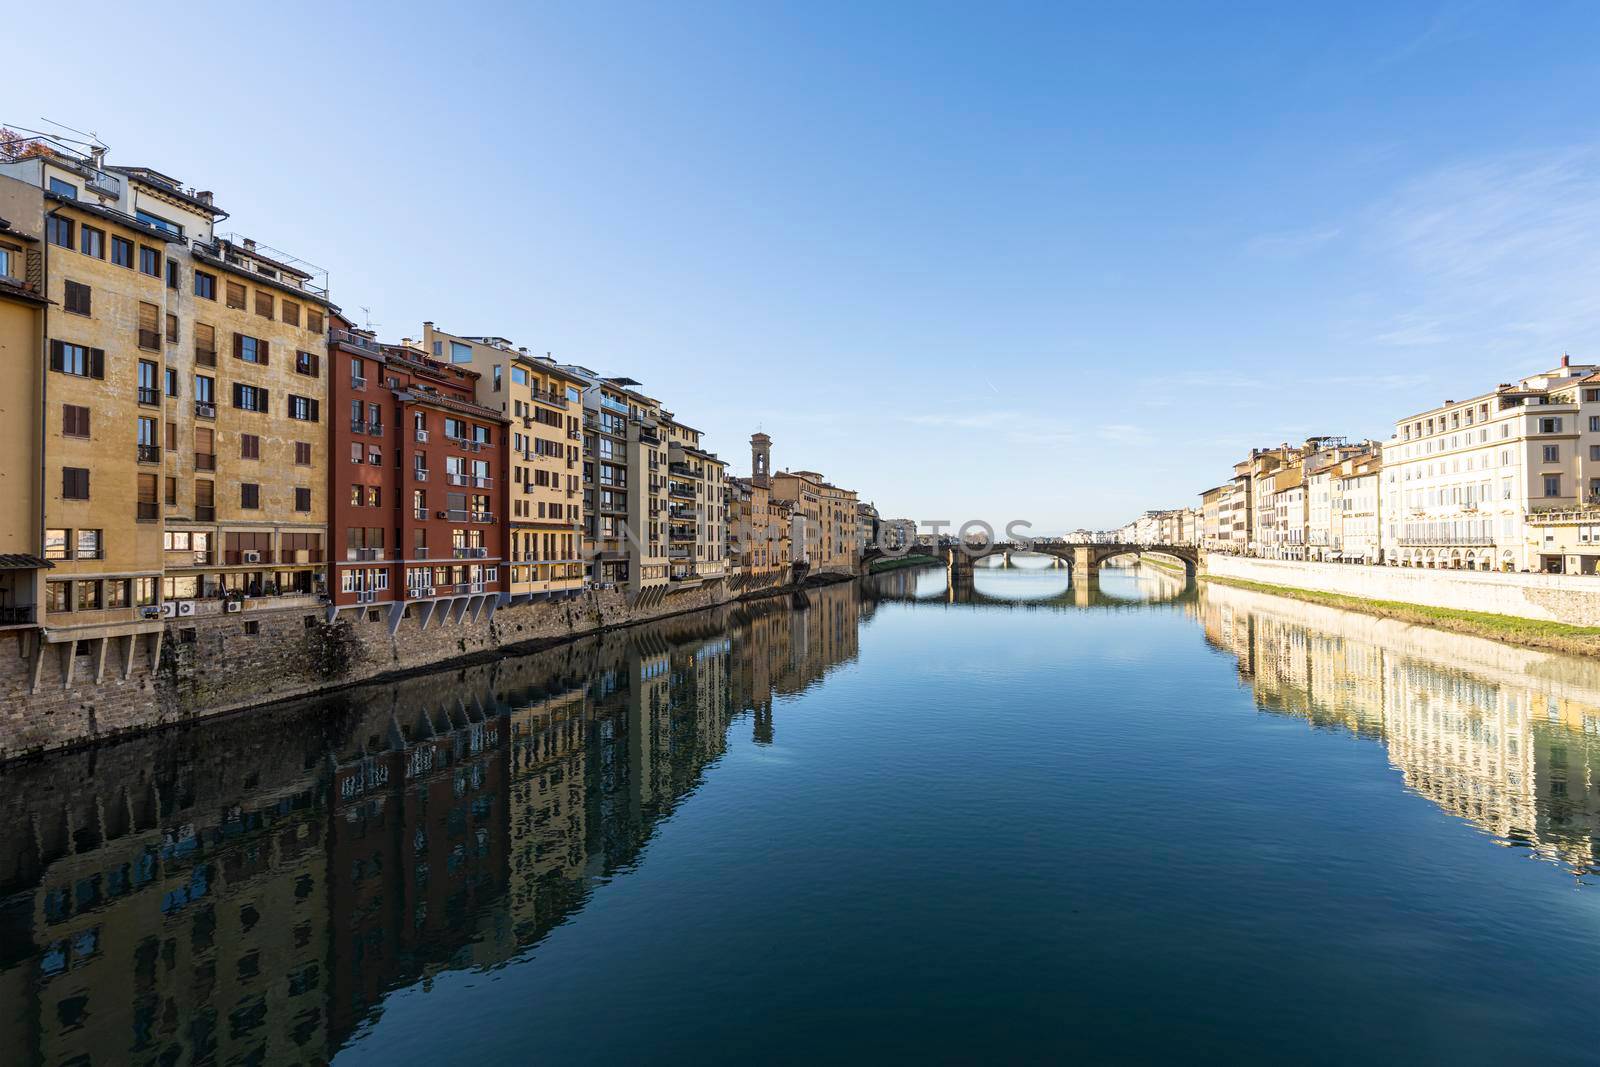 Ponte Vecchio in Florence, Italy by sergiodv